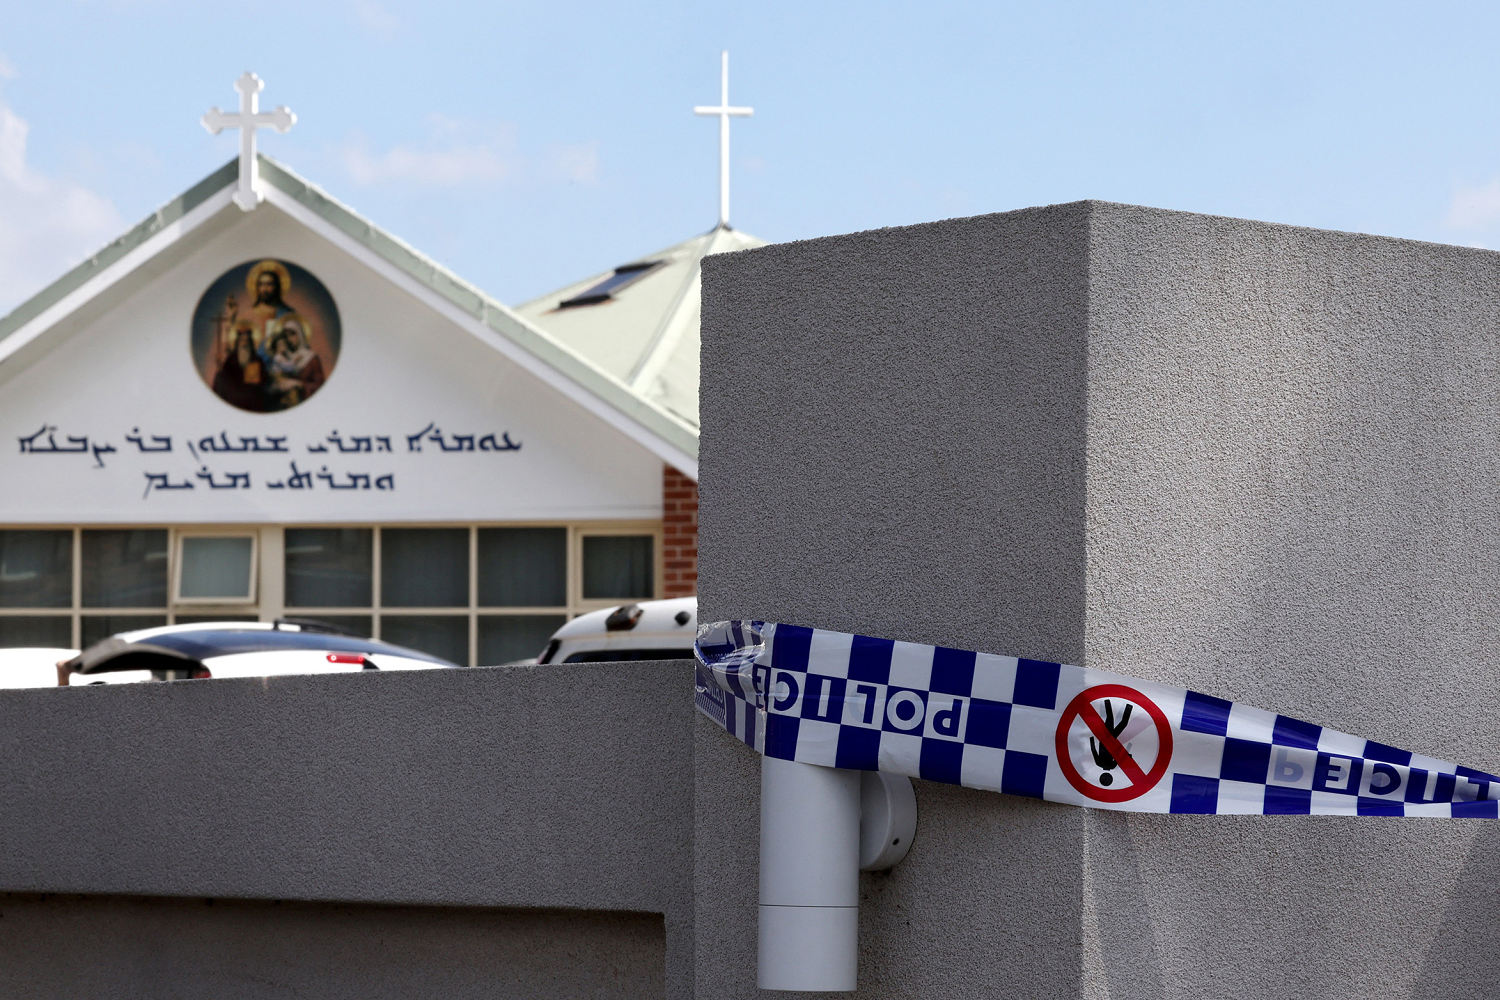 Teens plotted to buy guns and attack Jewish people after Sydney bishop was stabbed, police allege